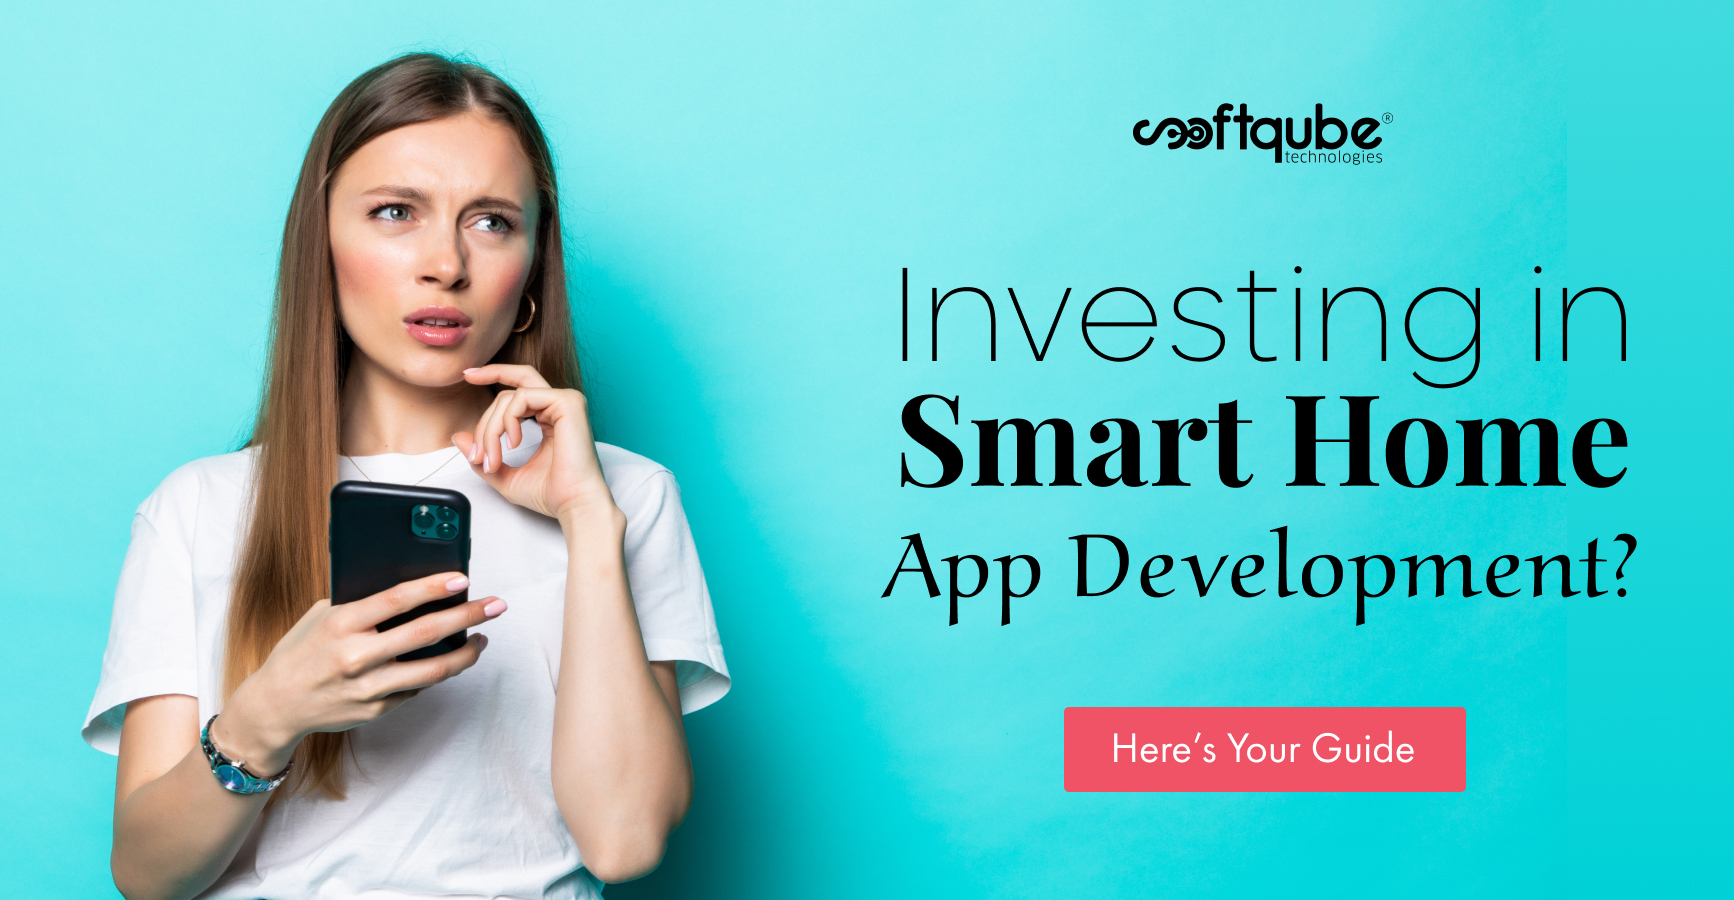 Know Everything about Smart Home App Development. Your Guide Before You Want To Invest.